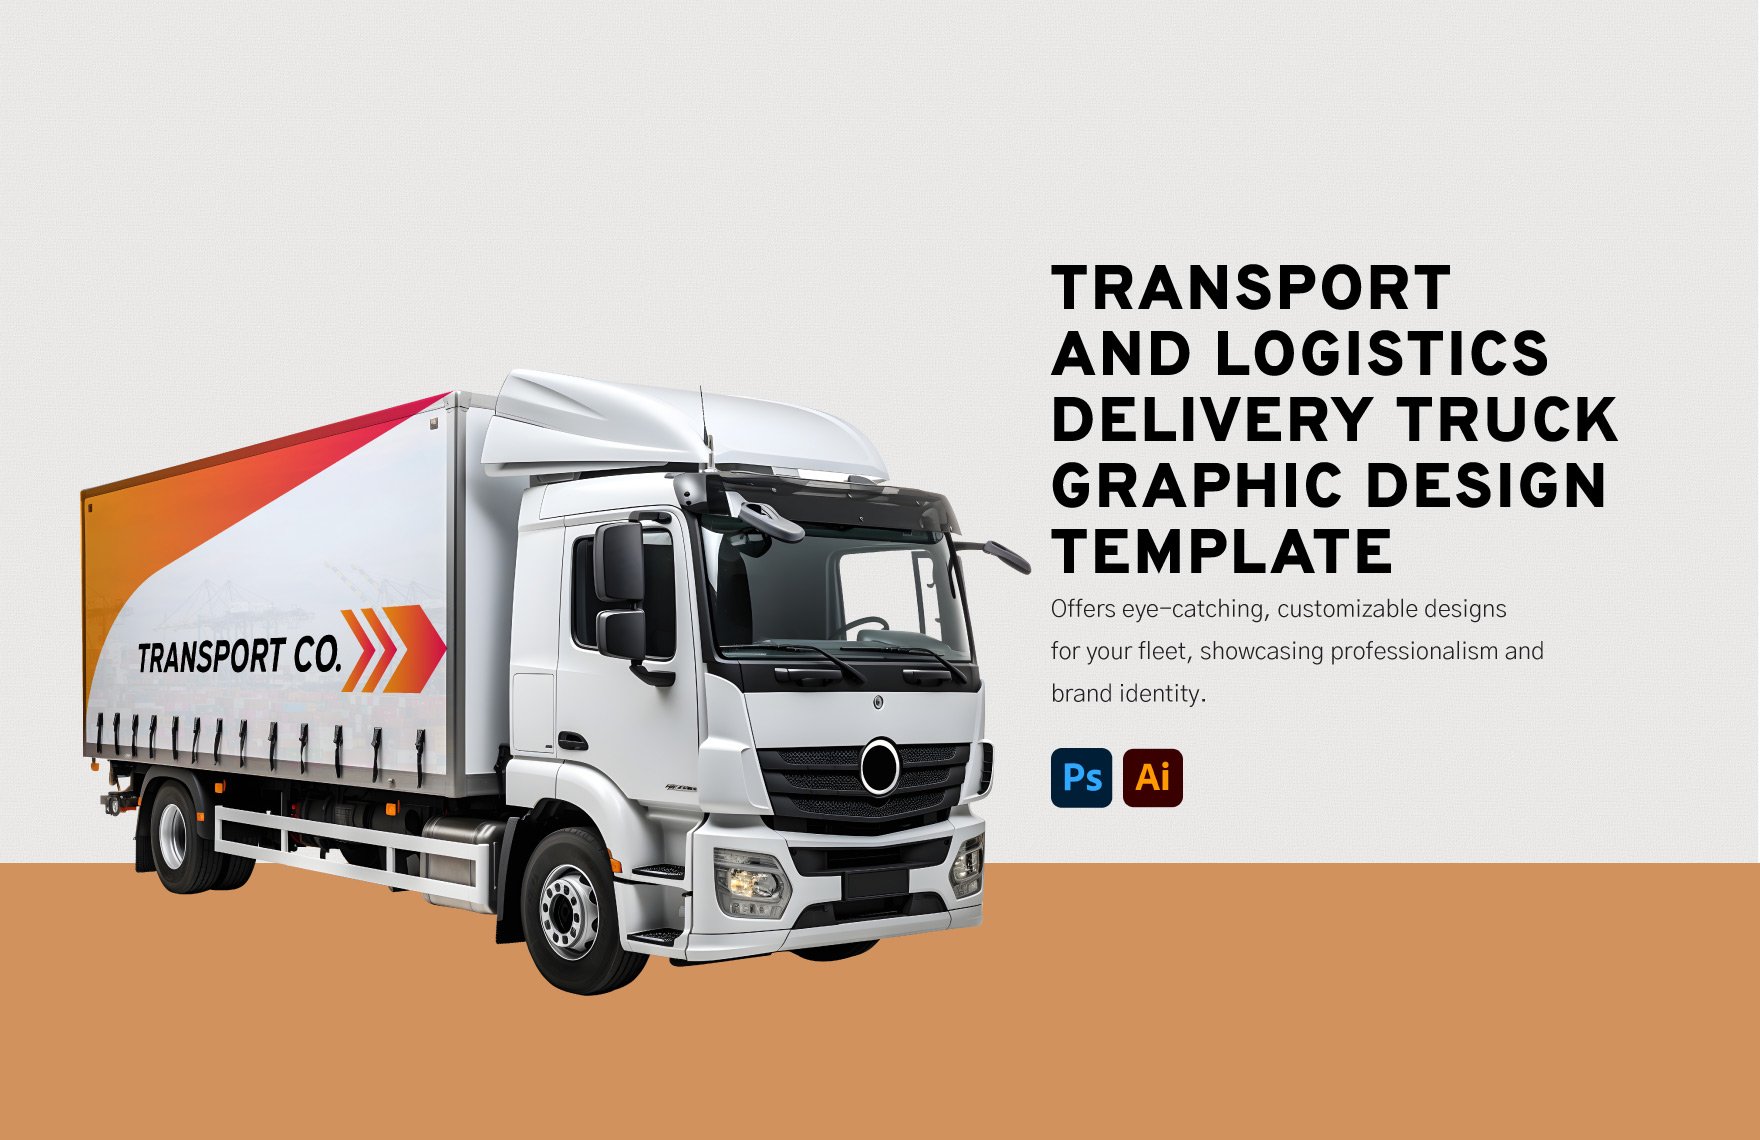 Transport and Logistics Delivery Truck Graphic Design Template in Illustrator, PSD